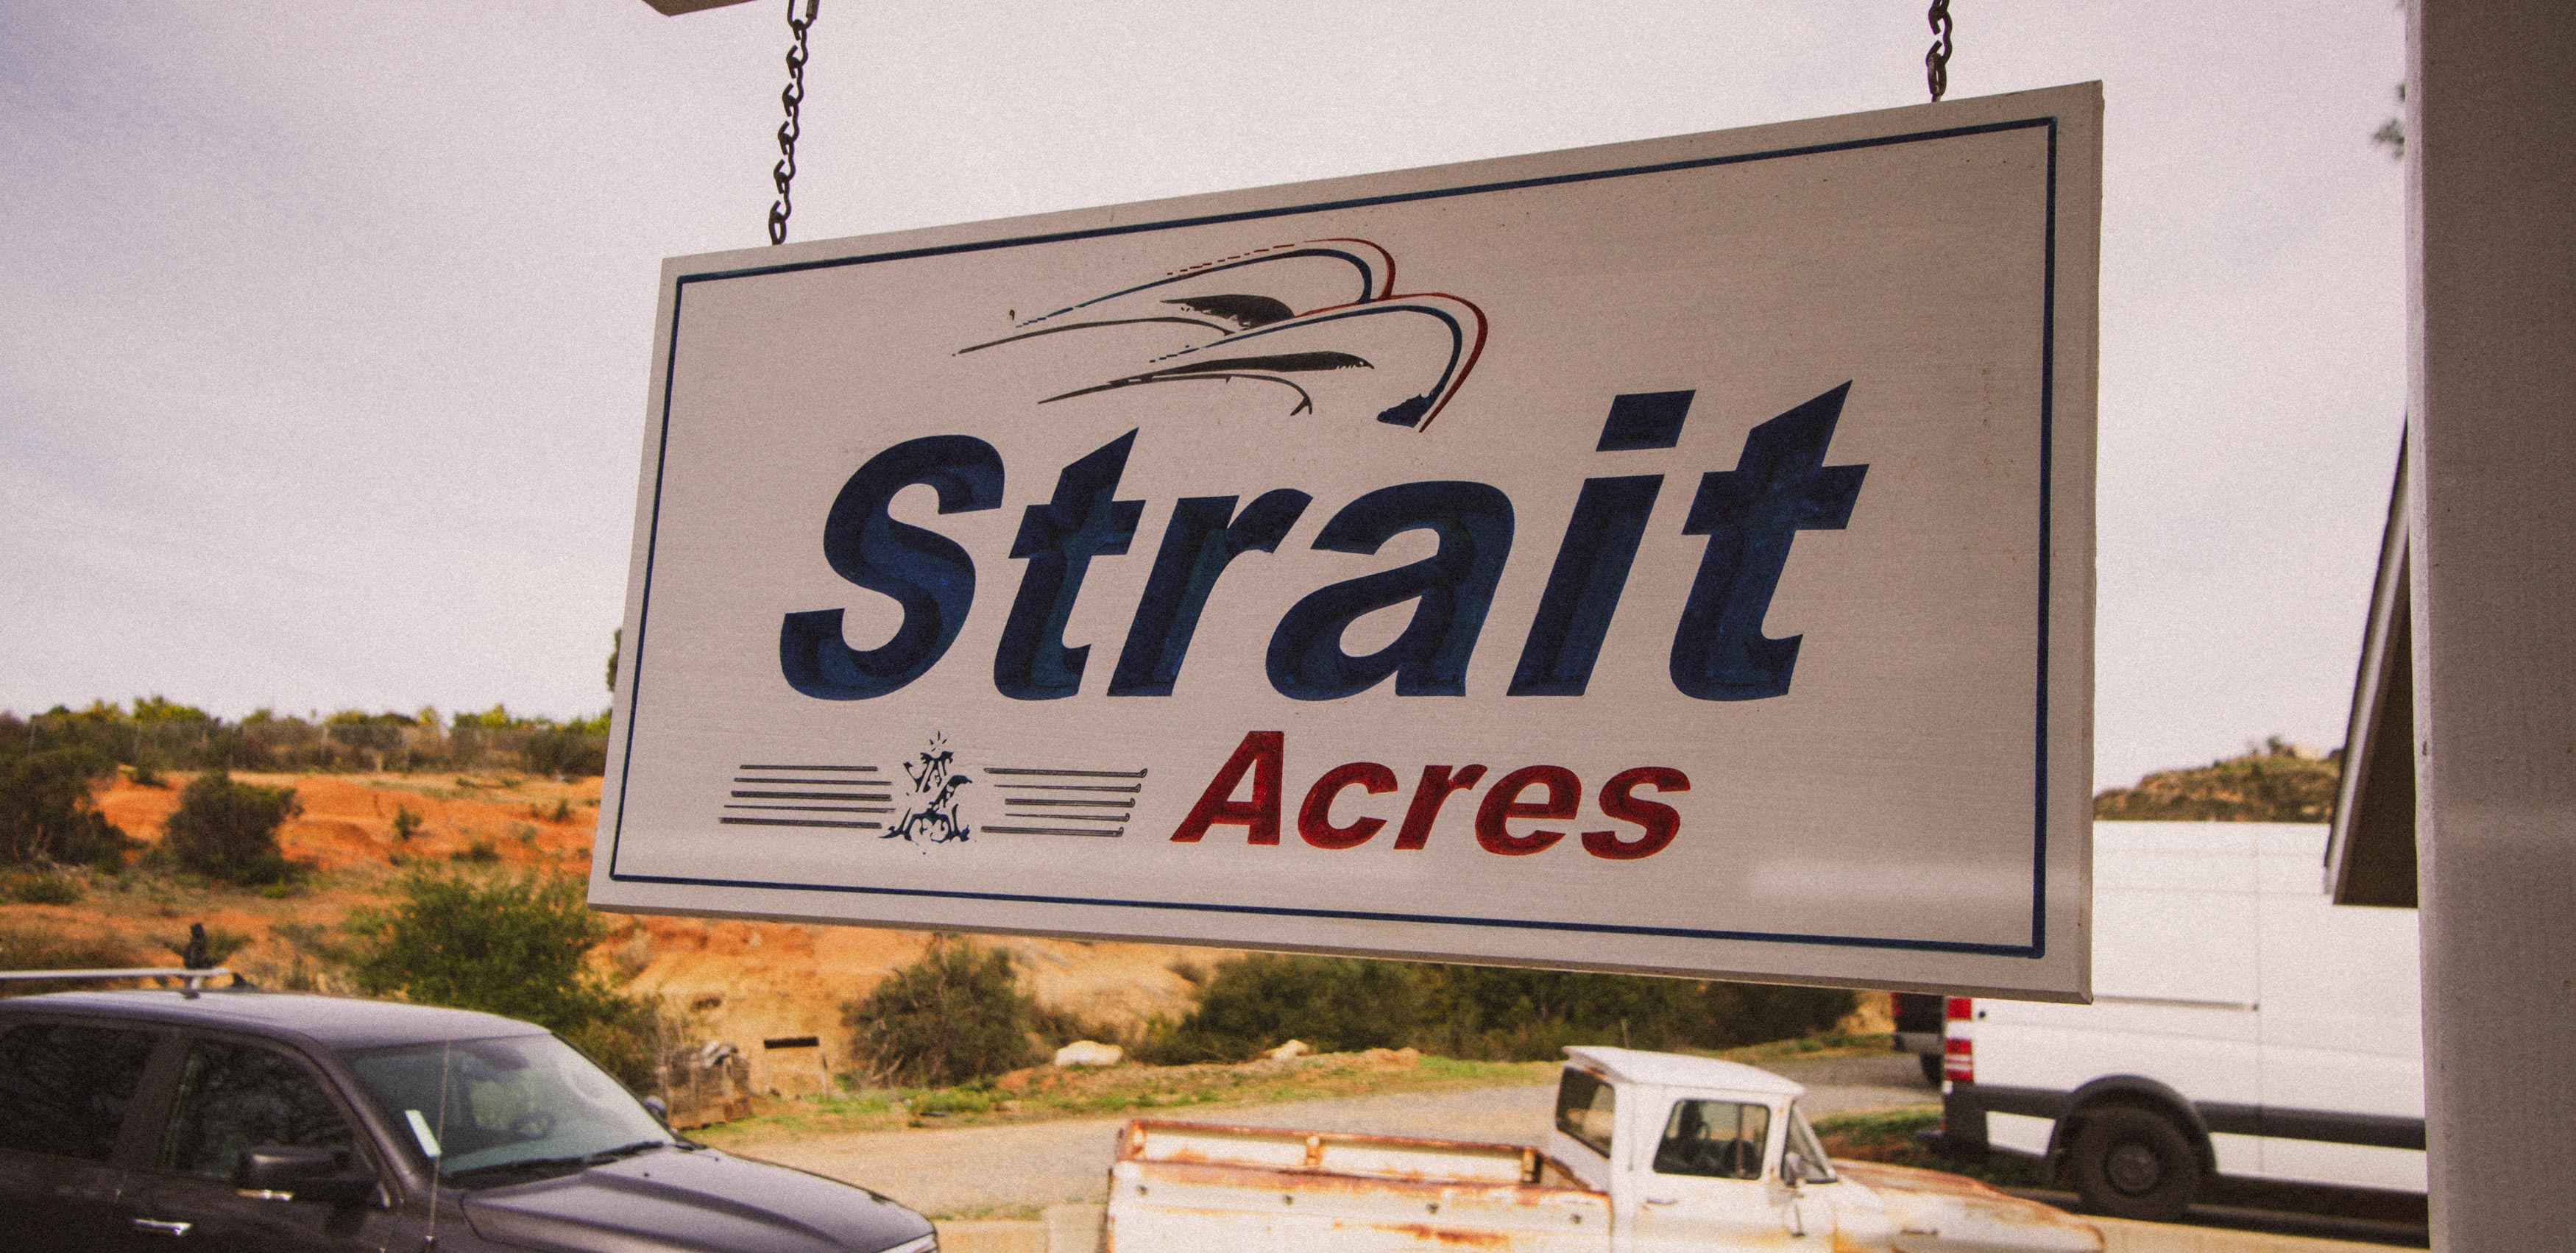 Married with Acres: The Strait